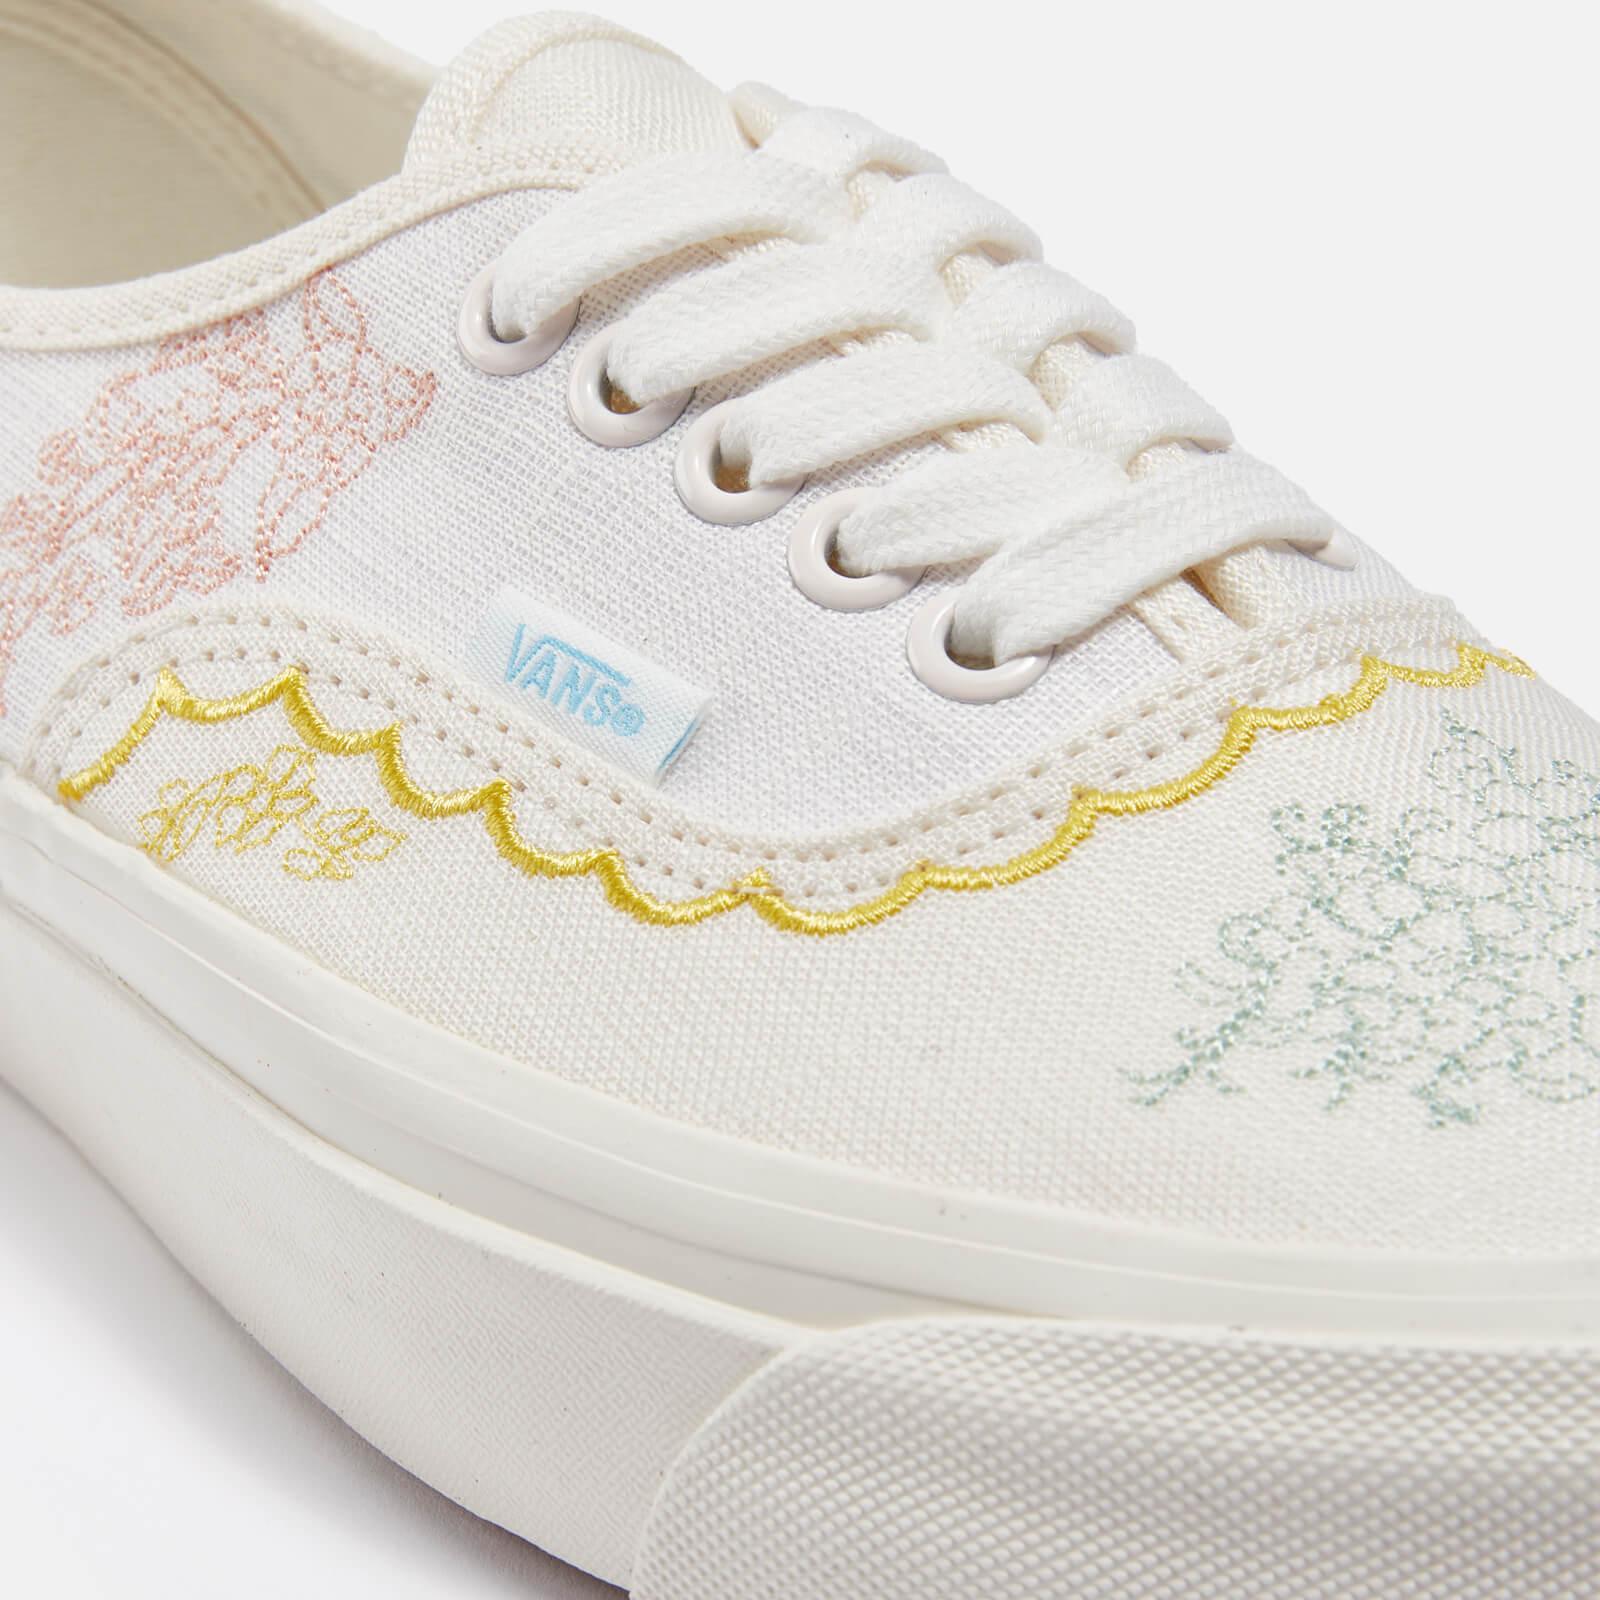 Vans Blossom Authentic Floral-embroidered Linen Trainers in White | Lyst